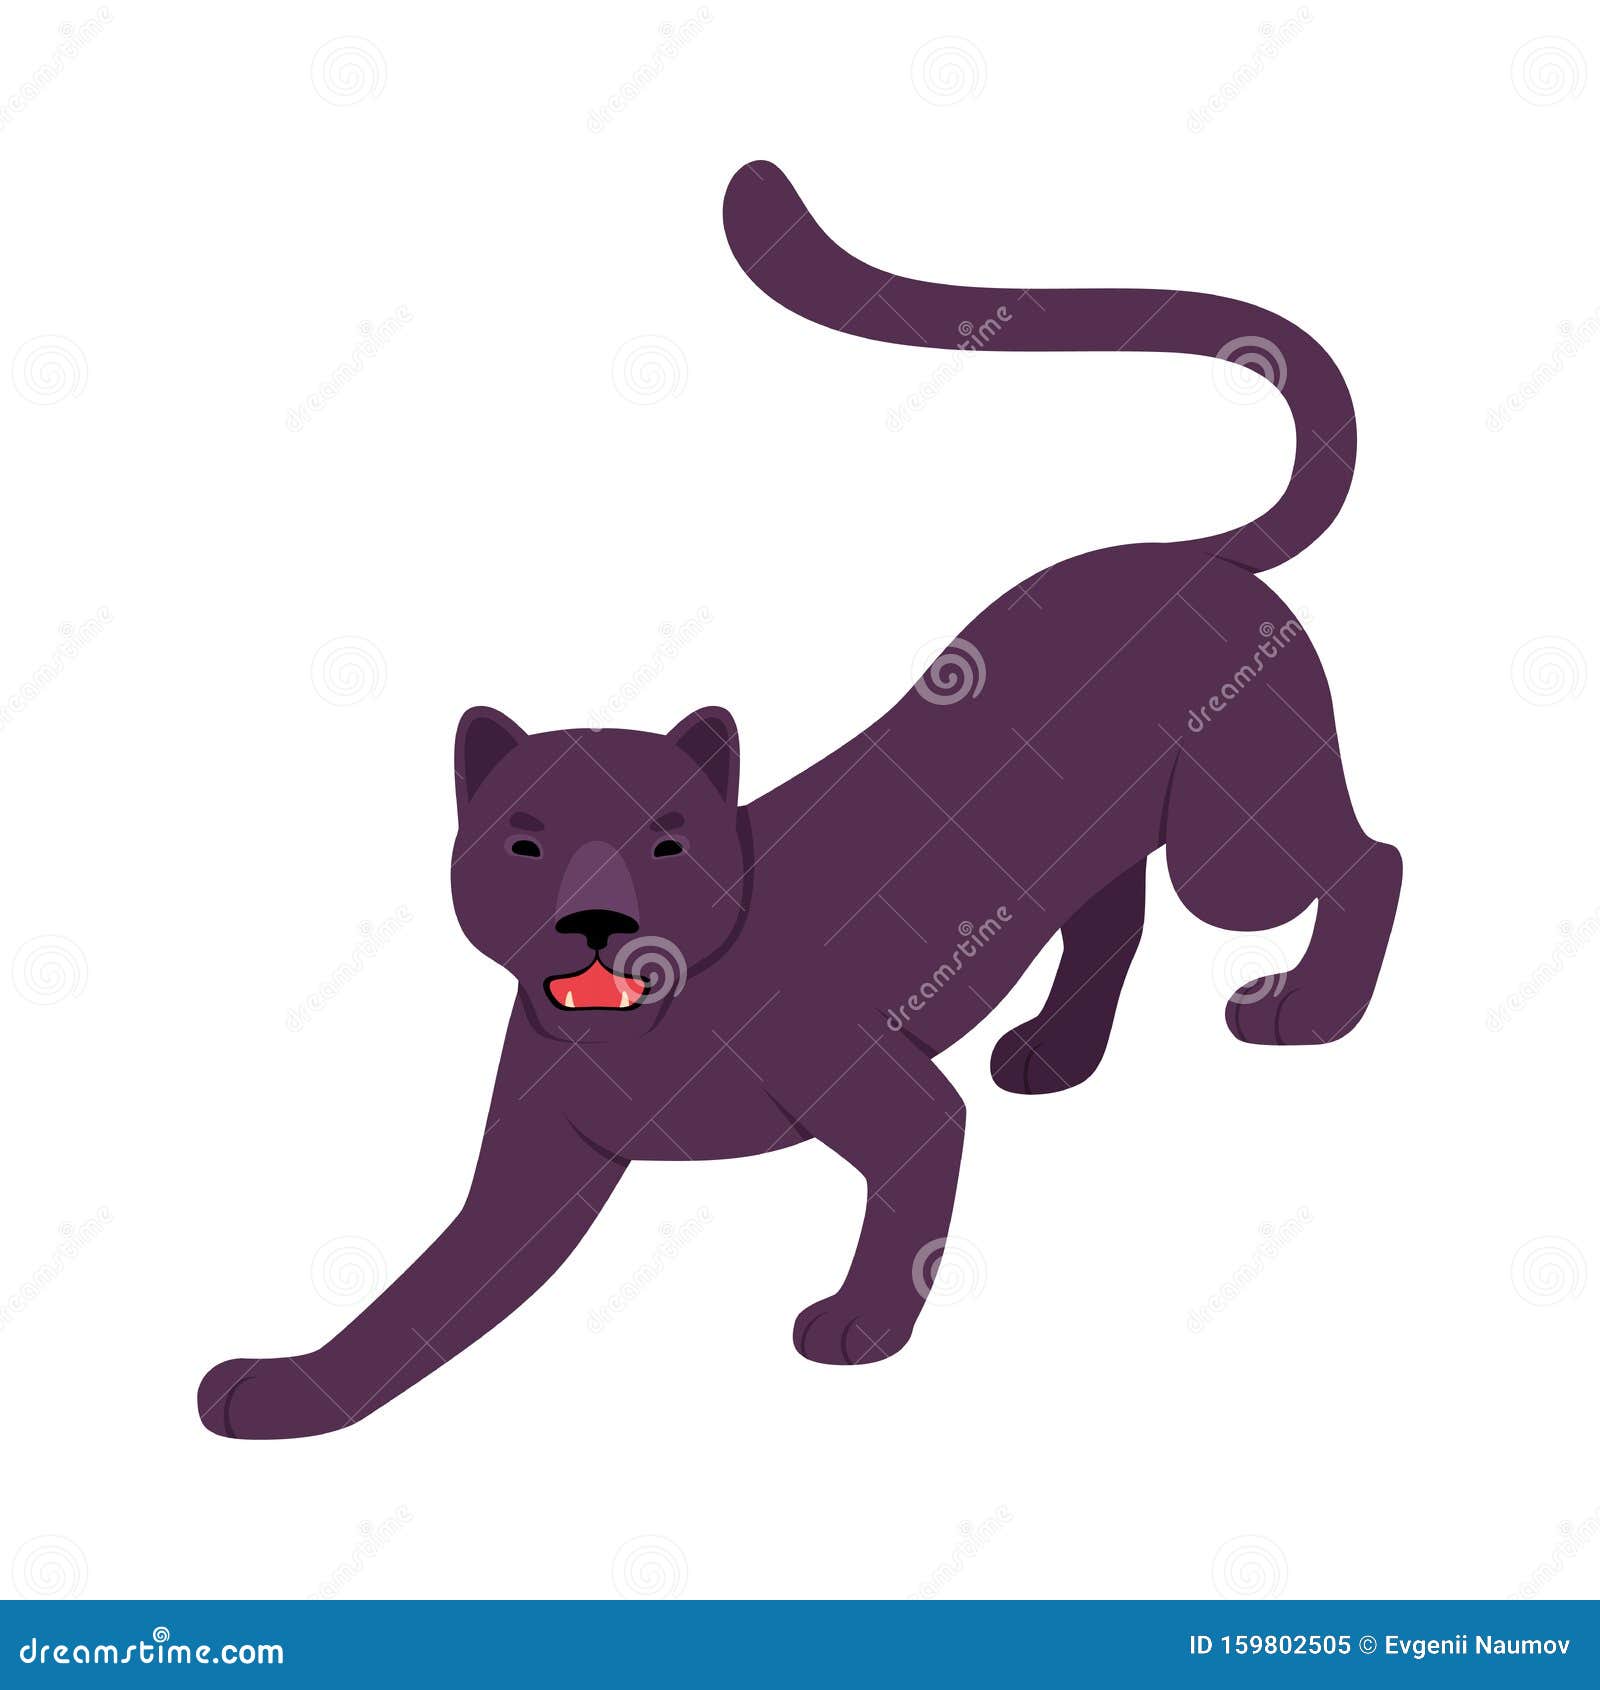  Black  Panther  Vector  Illustration On A White Background  